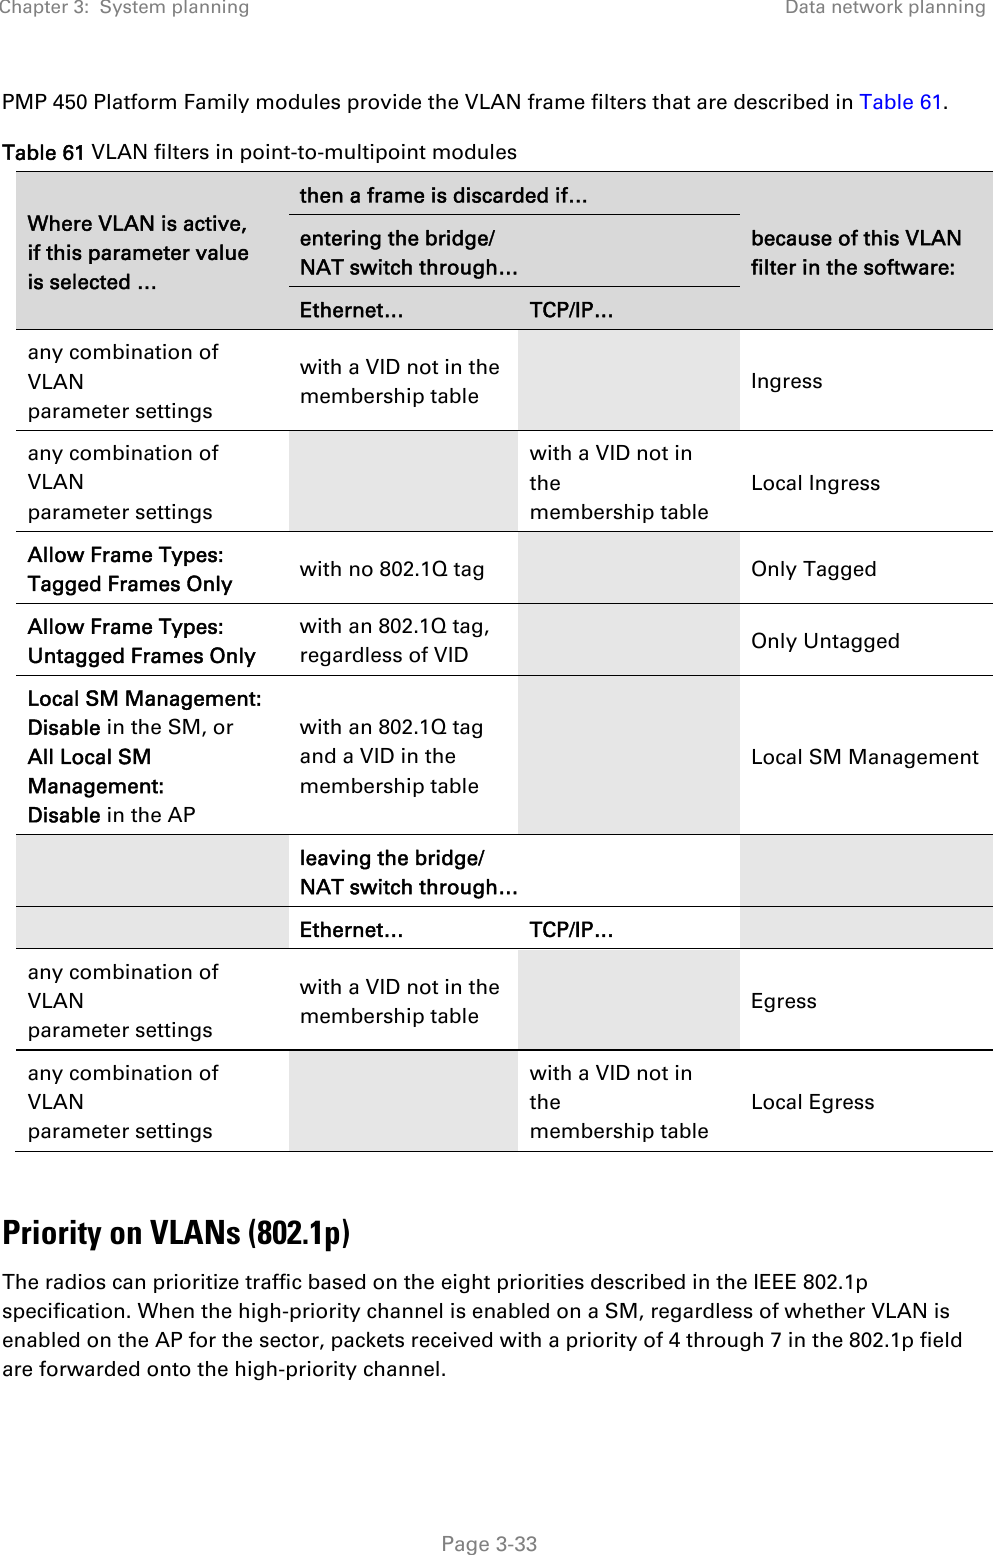 Chapter 3:  System planning  Data network planning   Page 3-33 PMP 450 Platform Family modules provide the VLAN frame filters that are described in Table 61. Table 61 VLAN filters in point-to-multipoint modules Where VLAN is active, if this parameter value is selected … then a frame is discarded if… because of this VLAN filter in the software: entering the bridge/  NAT switch through… Ethernet…  TCP/IP… any combination of VLAN parameter settings with a VID not in the membership table   Ingress any combination of VLAN parameter settings  with a VID not in the membership table Local Ingress Allow Frame Types: Tagged Frames Only  with no 802.1Q tag   Only Tagged Allow Frame Types: Untagged Frames Only with an 802.1Q tag, regardless of VID   Only Untagged Local SM Management: Disable in the SM, or All Local SM Management: Disable in the AP with an 802.1Q tag and a VID in the membership table   Local SM Management  leaving the bridge/ NAT switch through…    Ethernet… TCP/IP…   any combination of VLAN parameter settings with a VID not in the membership table   Egress any combination of VLAN parameter settings  with a VID not in the membership table Local Egress  Priority on VLANs (802.1p) The radios can prioritize traffic based on the eight priorities described in the IEEE 802.1p specification. When the high-priority channel is enabled on a SM, regardless of whether VLAN is enabled on the AP for the sector, packets received with a priority of 4 through 7 in the 802.1p field are forwarded onto the high-priority channel. 